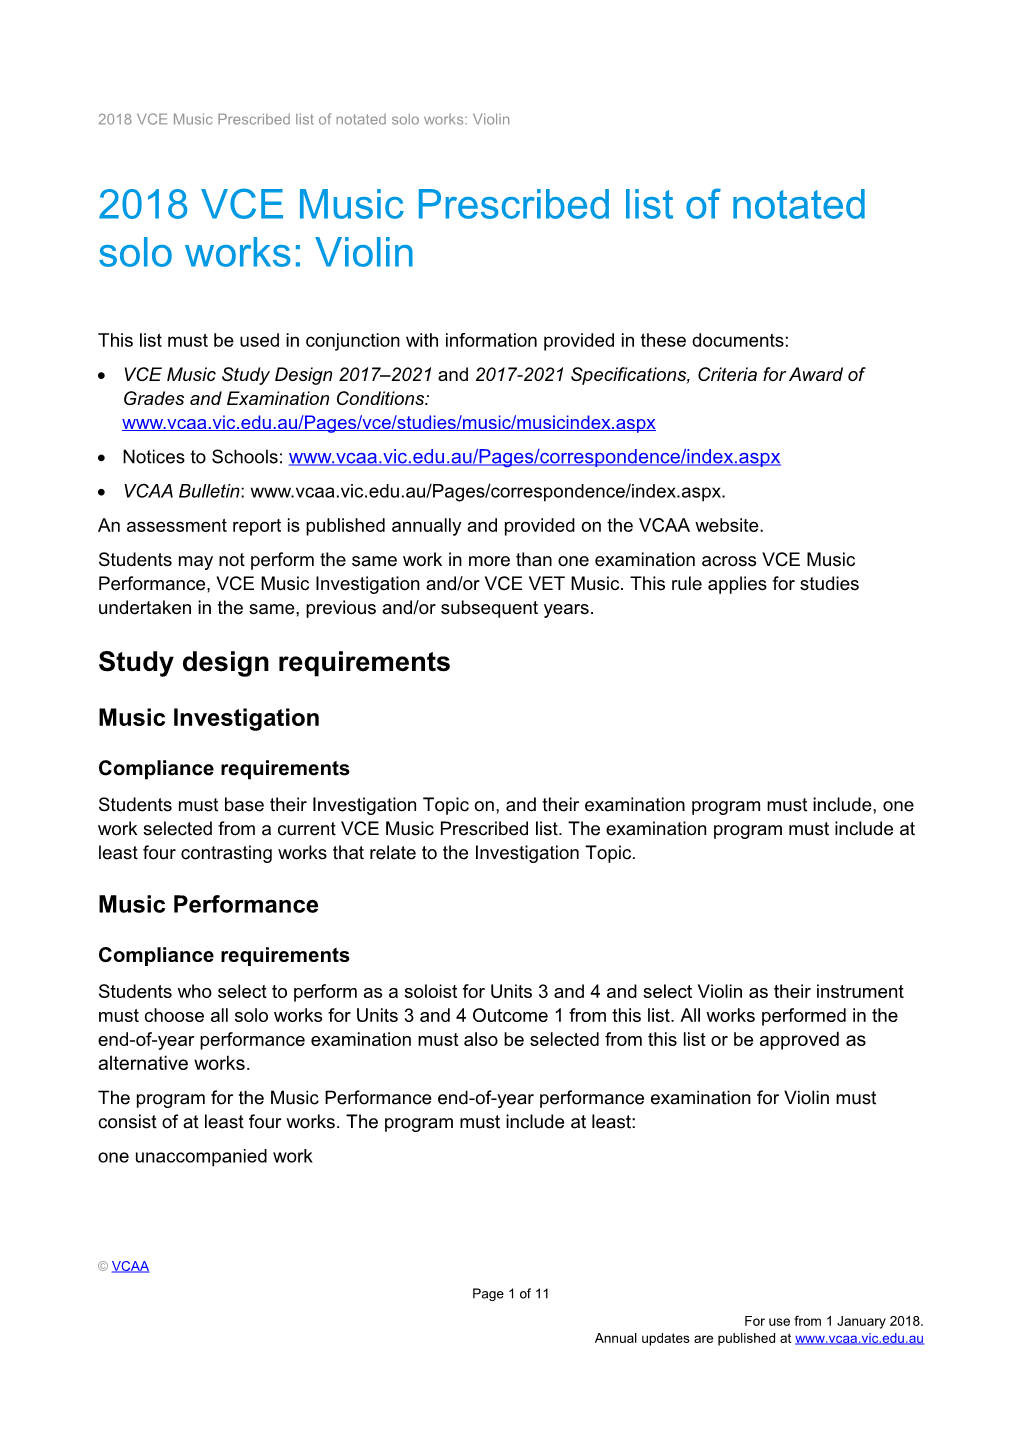 2018 VCE Music Prescribed List of Notated Solo Works: Violin